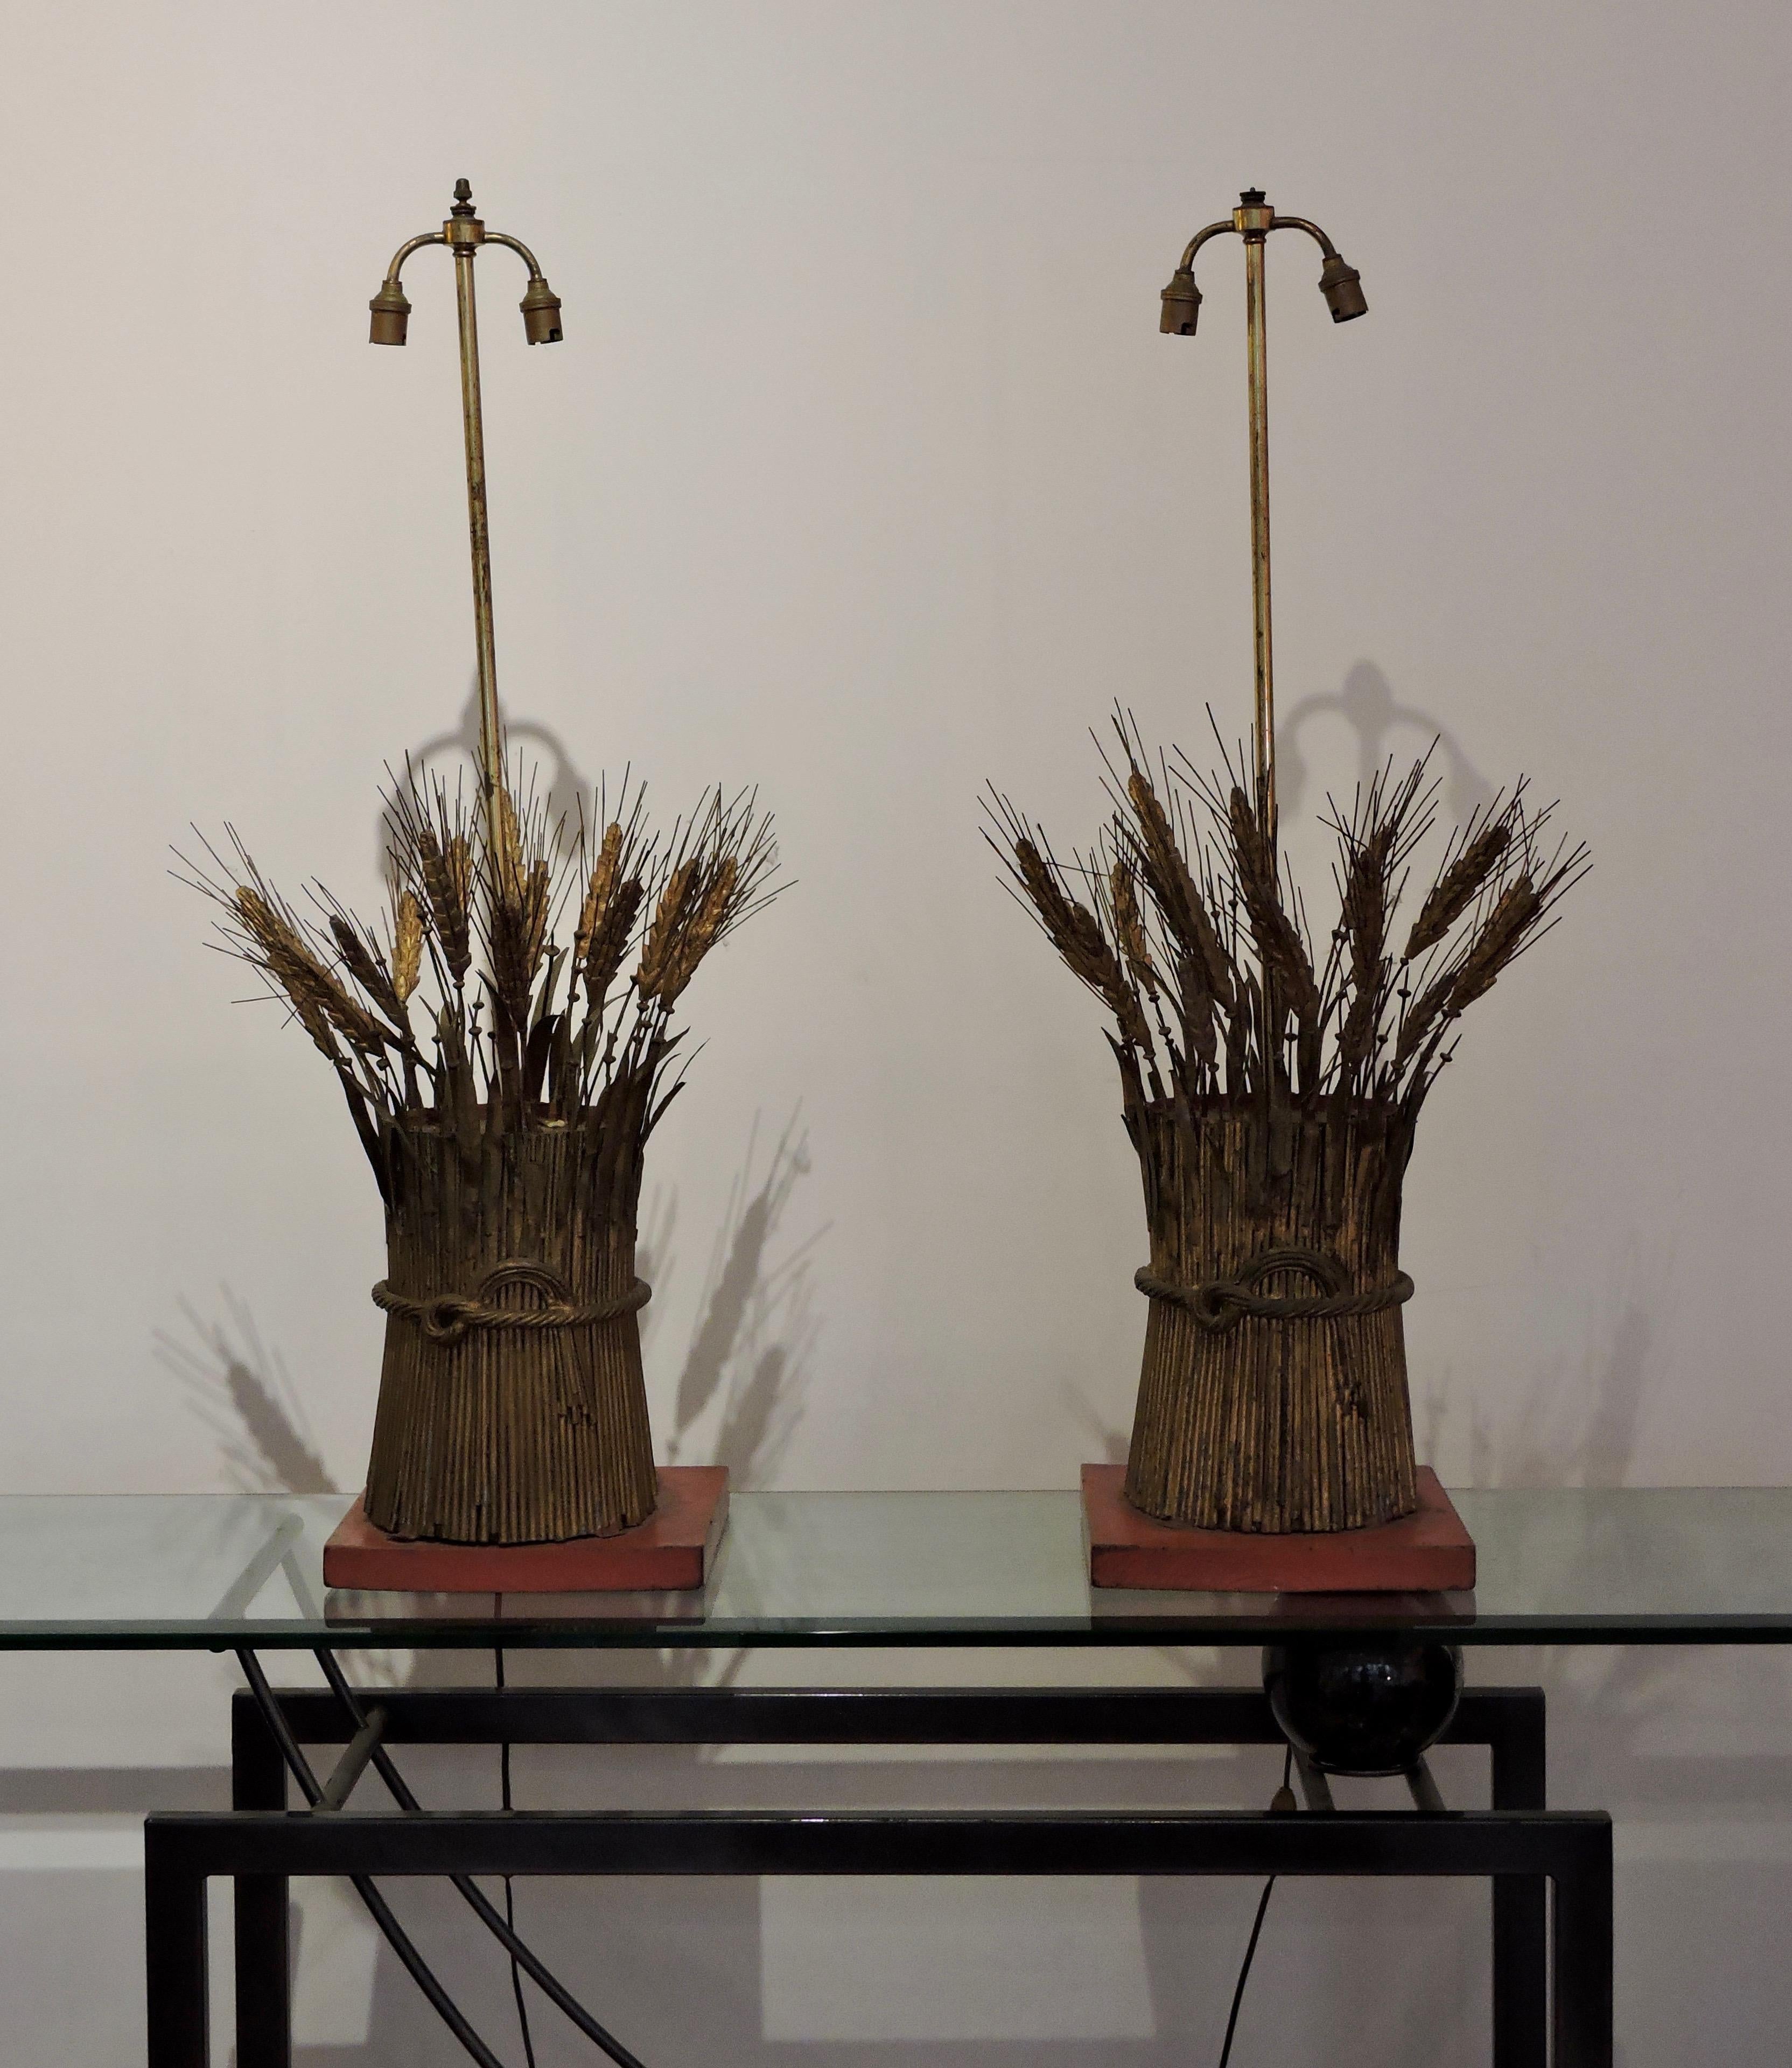 A 1960s vintage Coco Chanel Epis de Blés pair of lamps
Designed with a gilt metal sheaf of ears of wheat knotted by a symbolic rope, the wheat in giltwood.
Standing on red lacquer square wood bases.
Fitted for electricity.
2 original shades in state